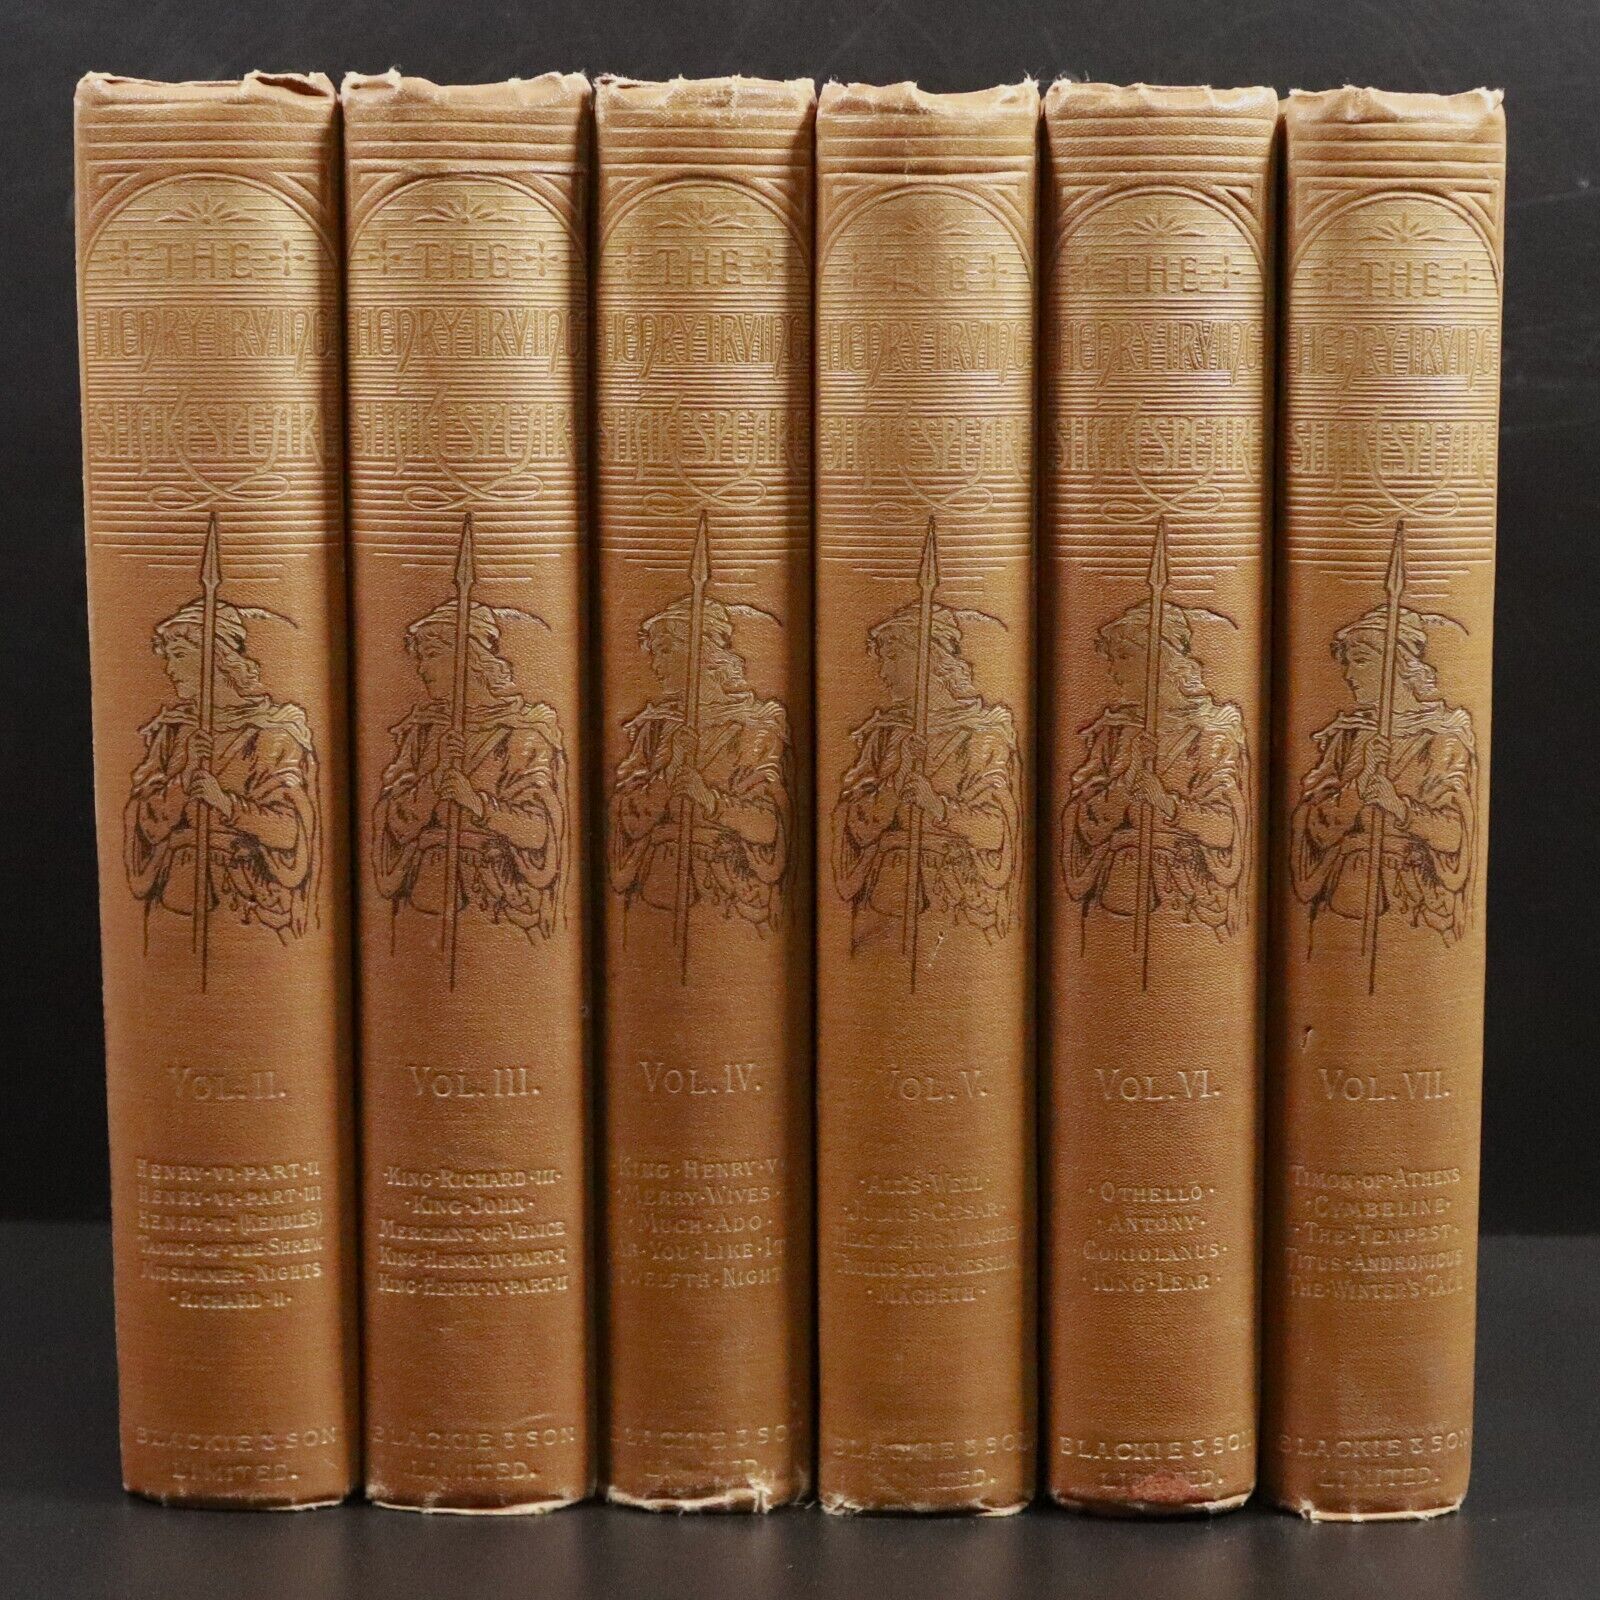 c1890 6vol Works Of William Shakespeare by Irving & Marshall Antique Books